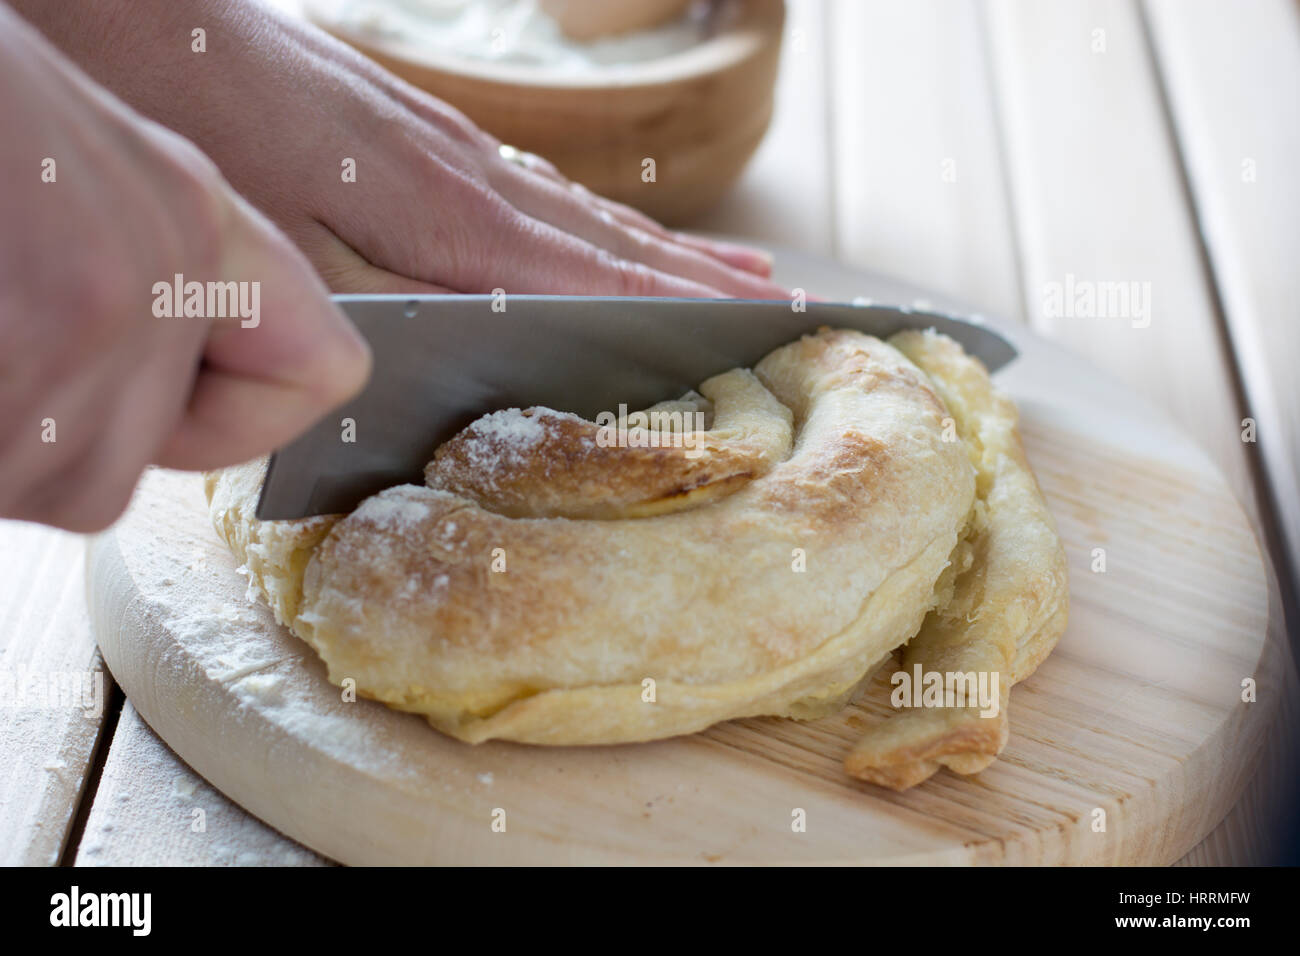 Female hands cutting freshly baked cheese pie on the wooden plate Stock Photo